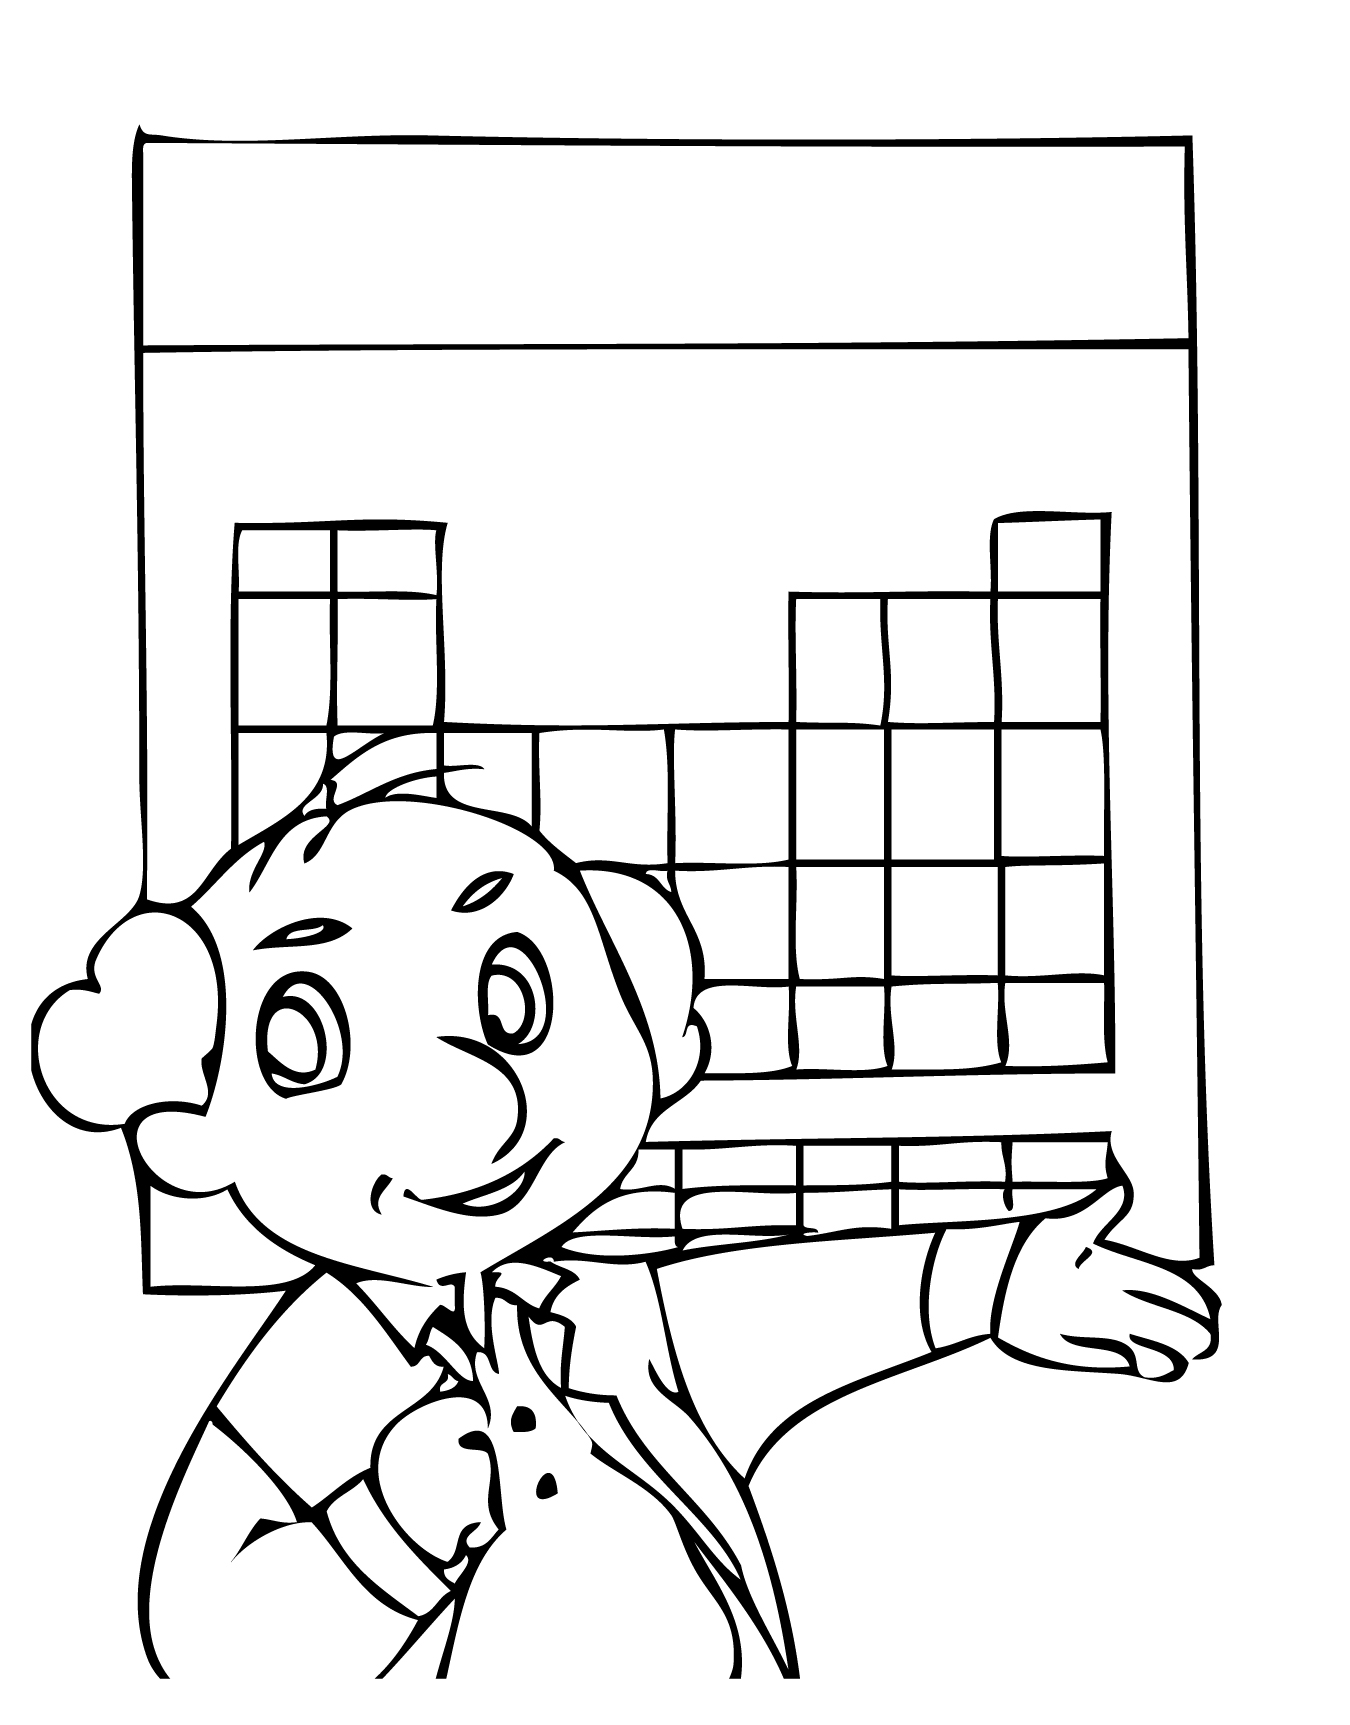 Periodic Table Coloring Page at GetColorings.com | Free printable